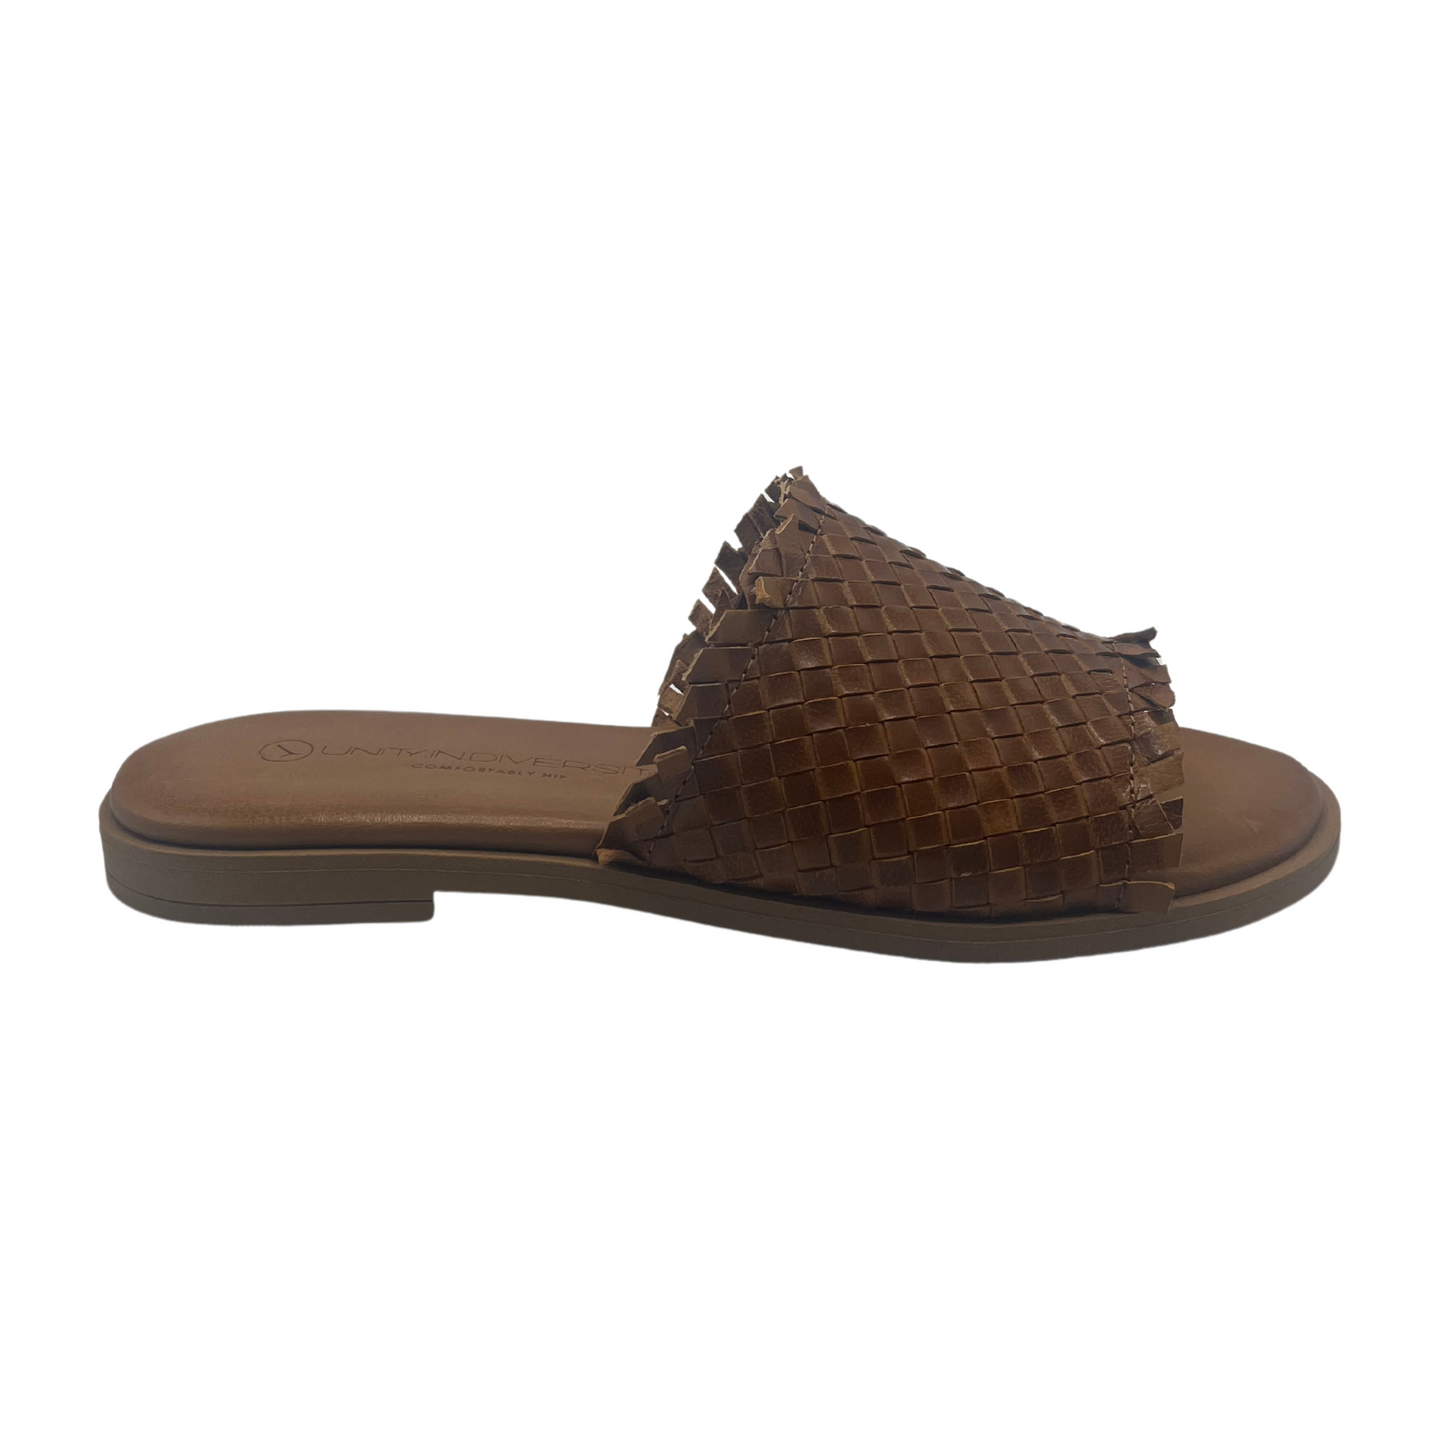 Right facing view of brown woven leather slip on sandal with low heel and leather lined footbed